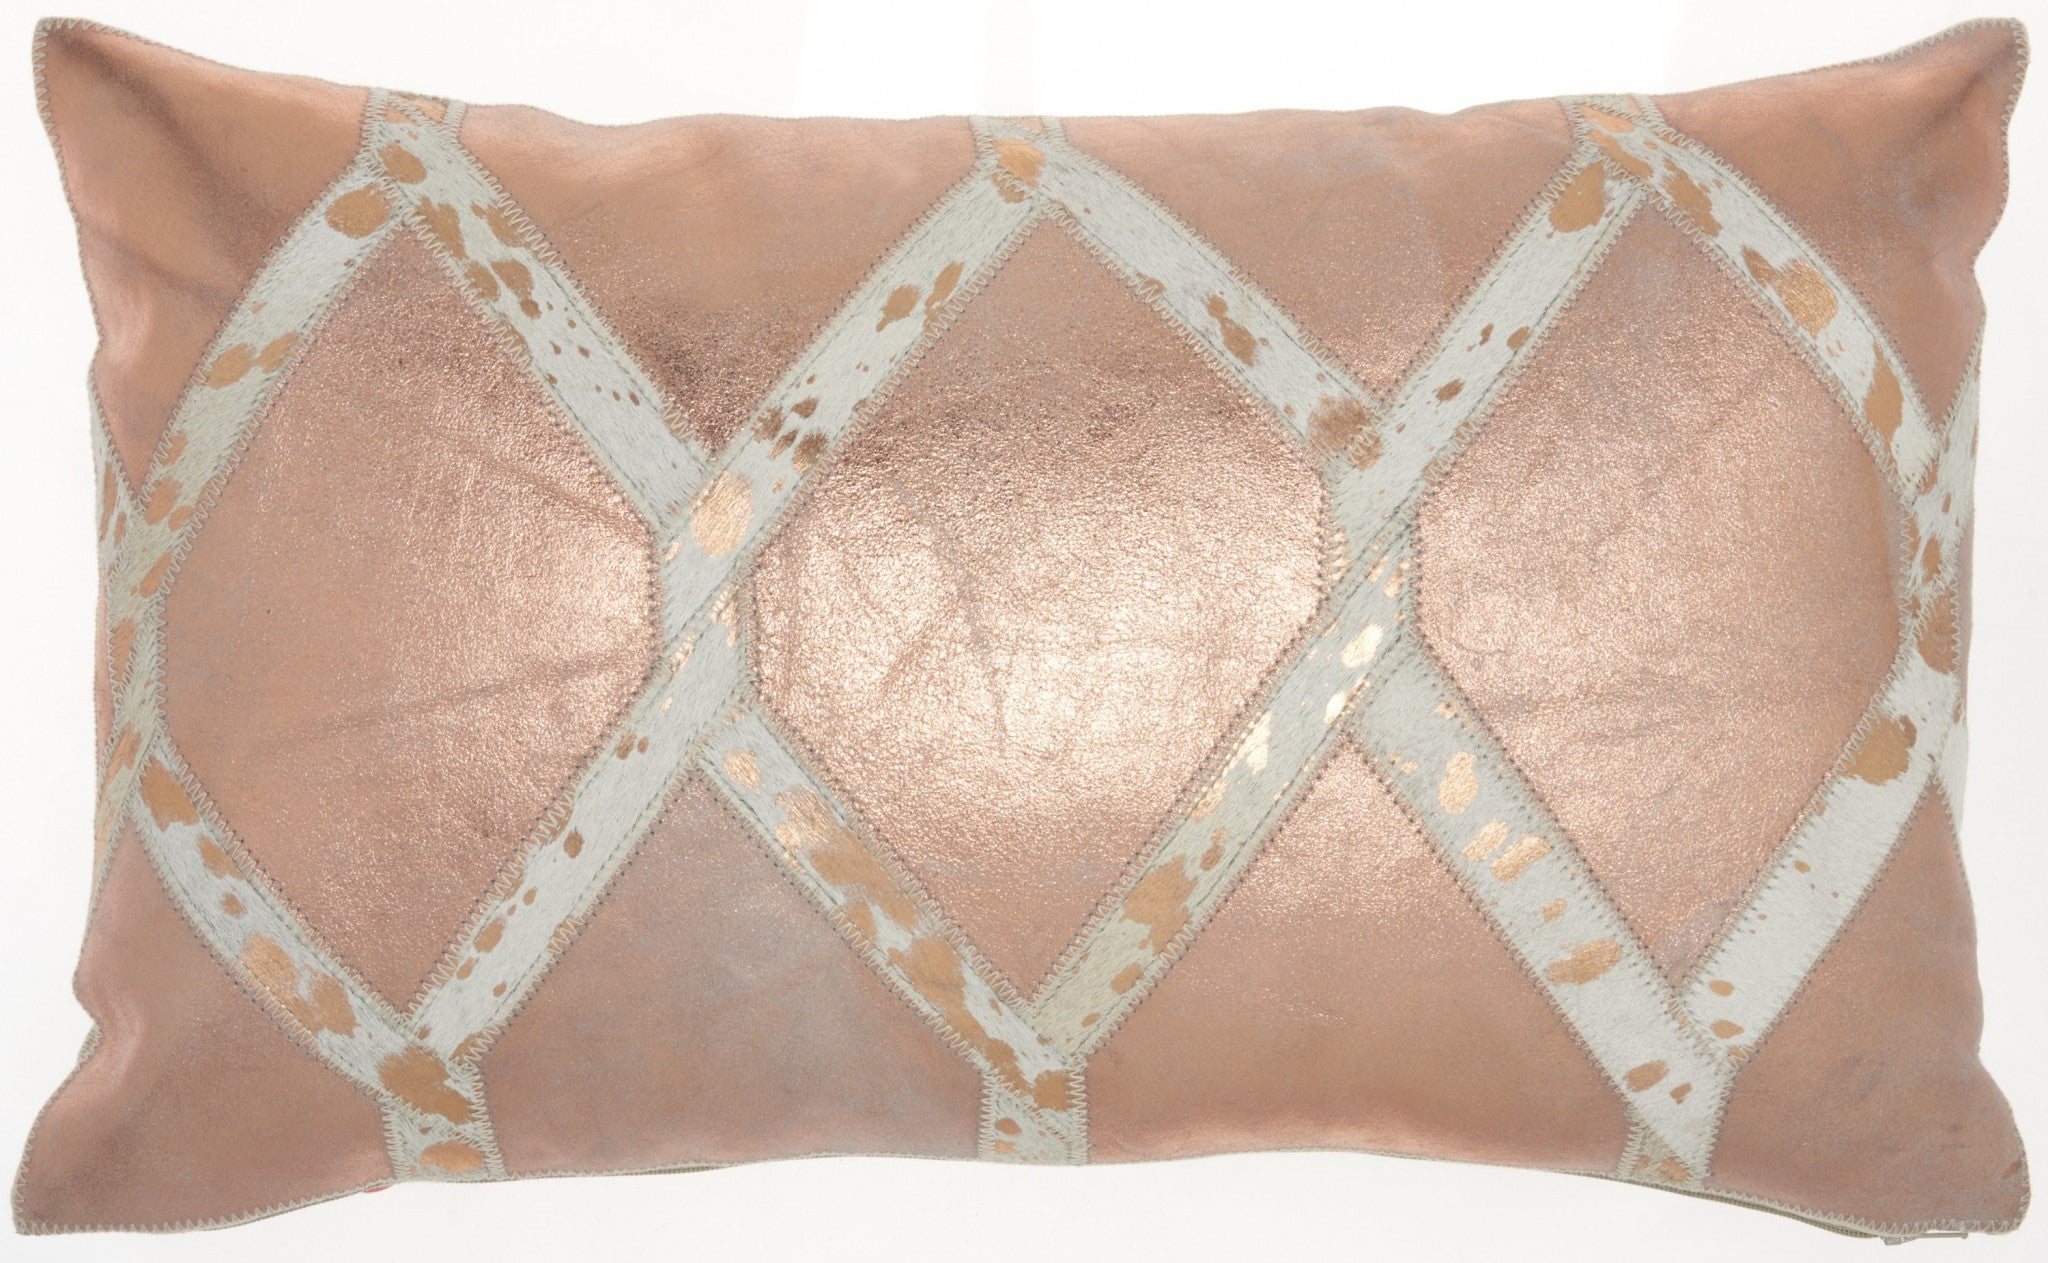 12" X 20" Rose Gold and White Metallic and Cowhide Throw Pillow